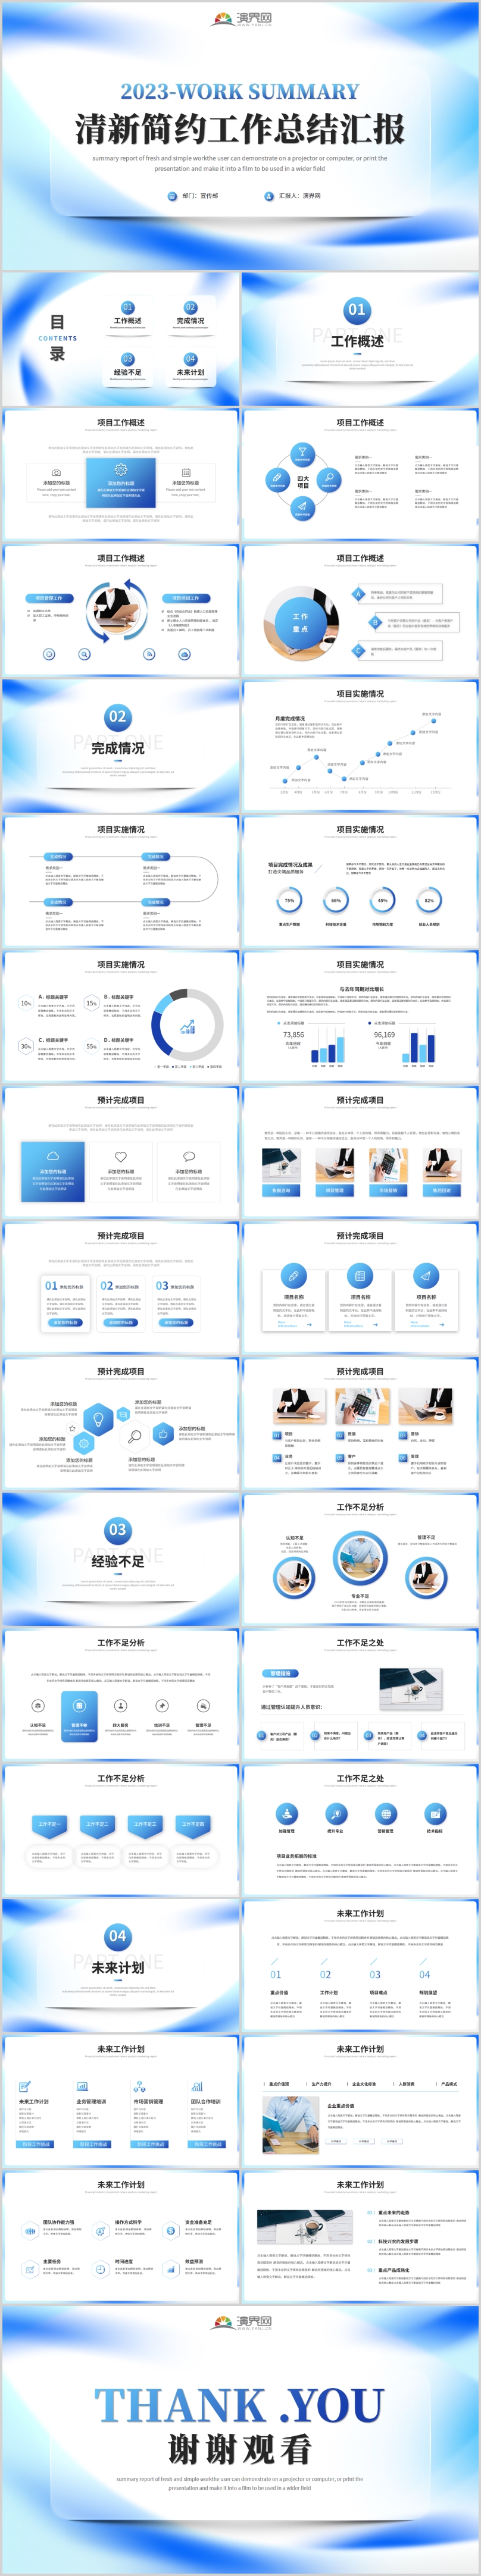  Fresh and simple business office work summary Mid year summary PPT template